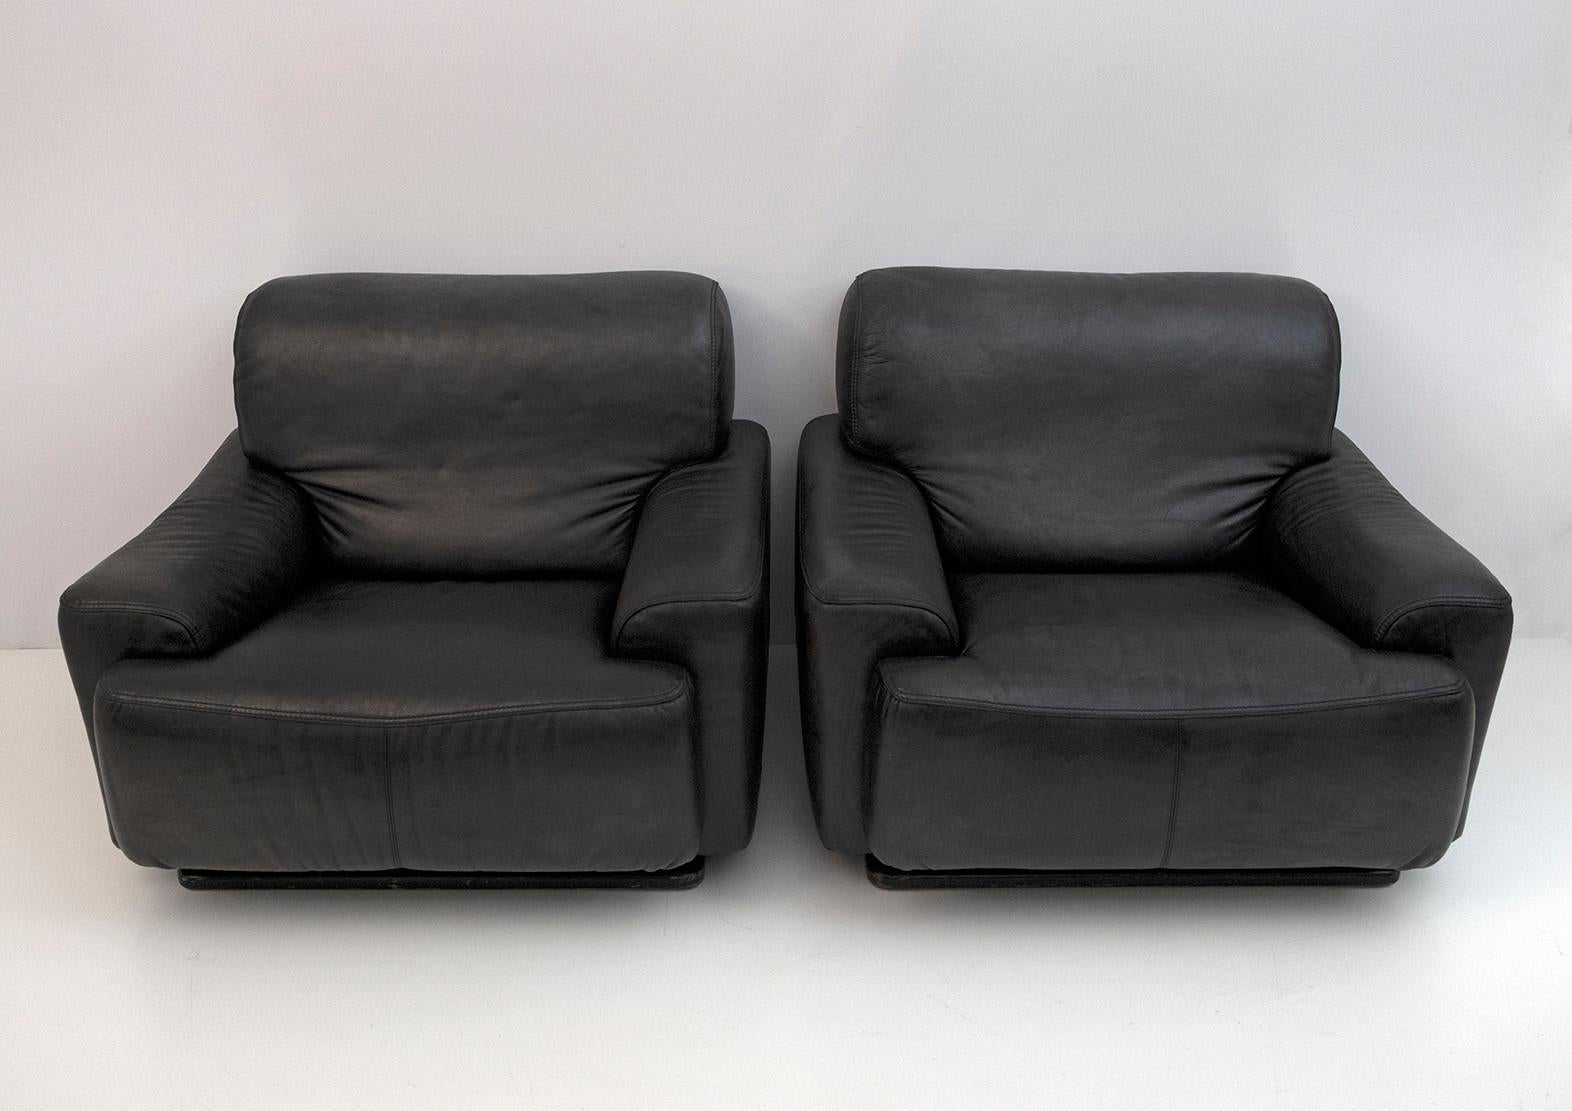 Late 20th Century Pair of Busnelli Mid-Century Modern Italian Leather Armchairs, 1970s For Sale